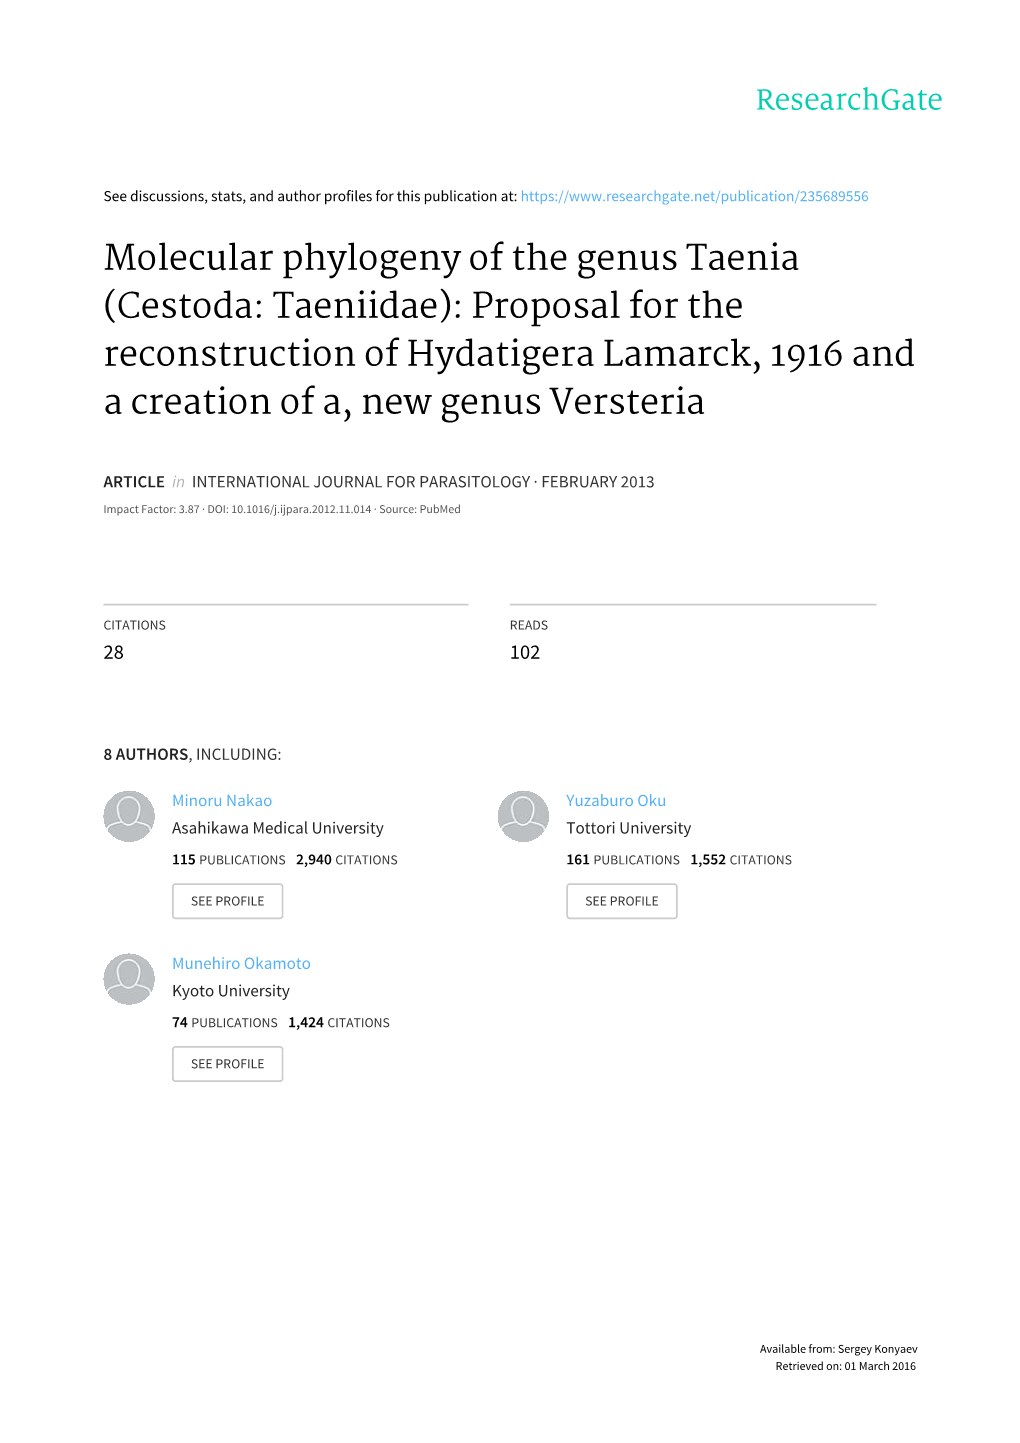 Molecular Phylogeny of the Genus Taenia (Cestoda: Taeniidae): Proposal for the Reconstruction of Hydatigera Lamarck, 1916 and a Creation of A, New Genus Versteria